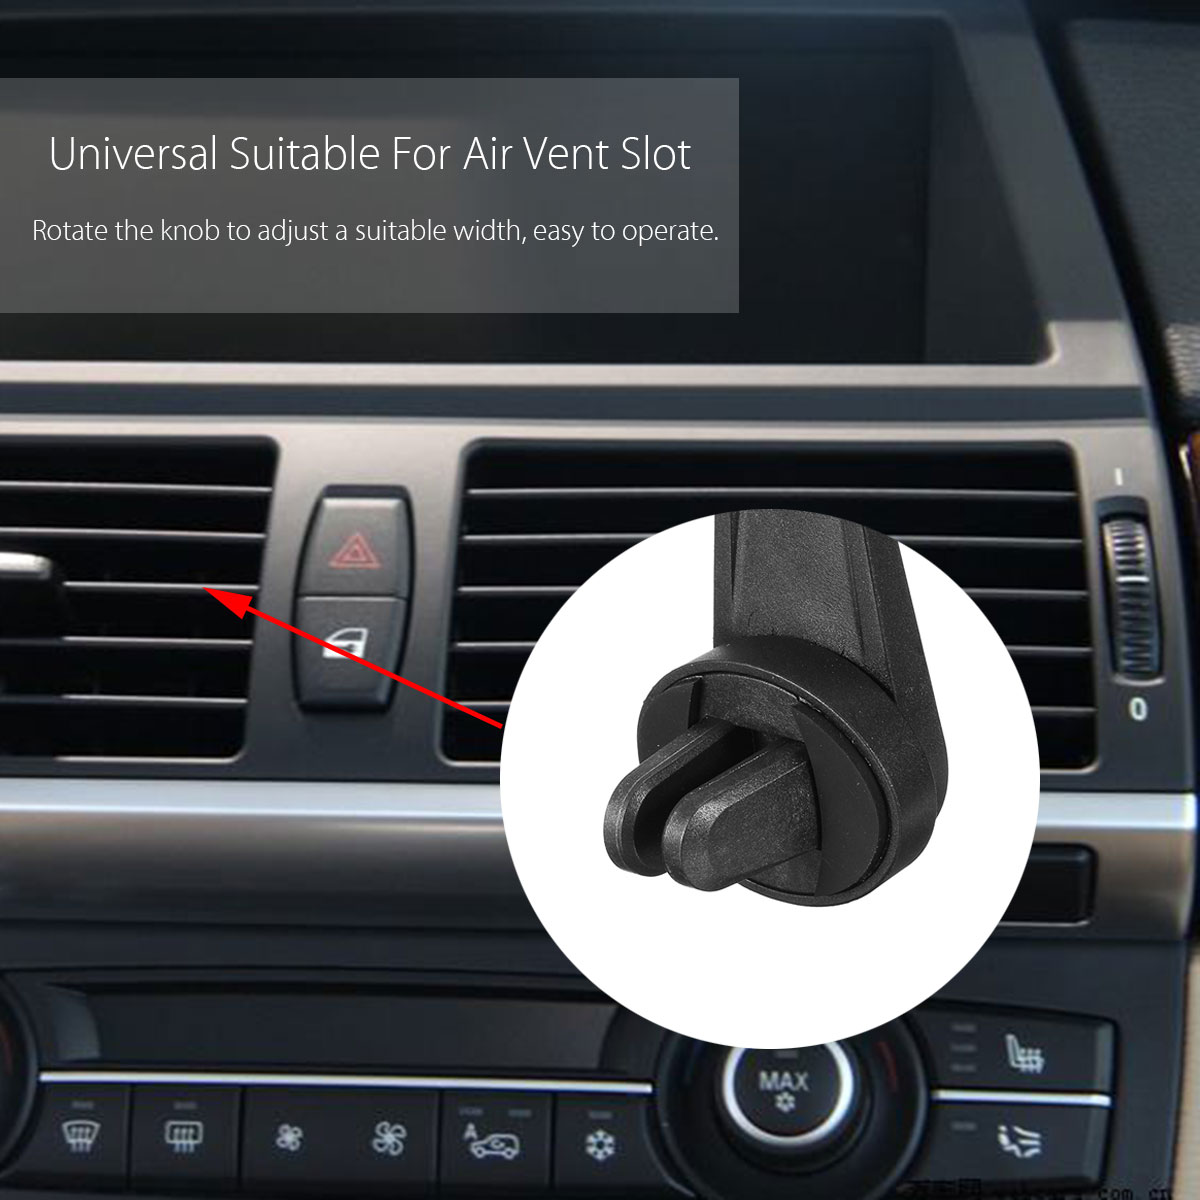 Universal-Car-Air-Vent-Magnetic-Mount-Outlet-Holder-Phone-Stand-for-iPhone-Samsung-Huawei-1189852-4